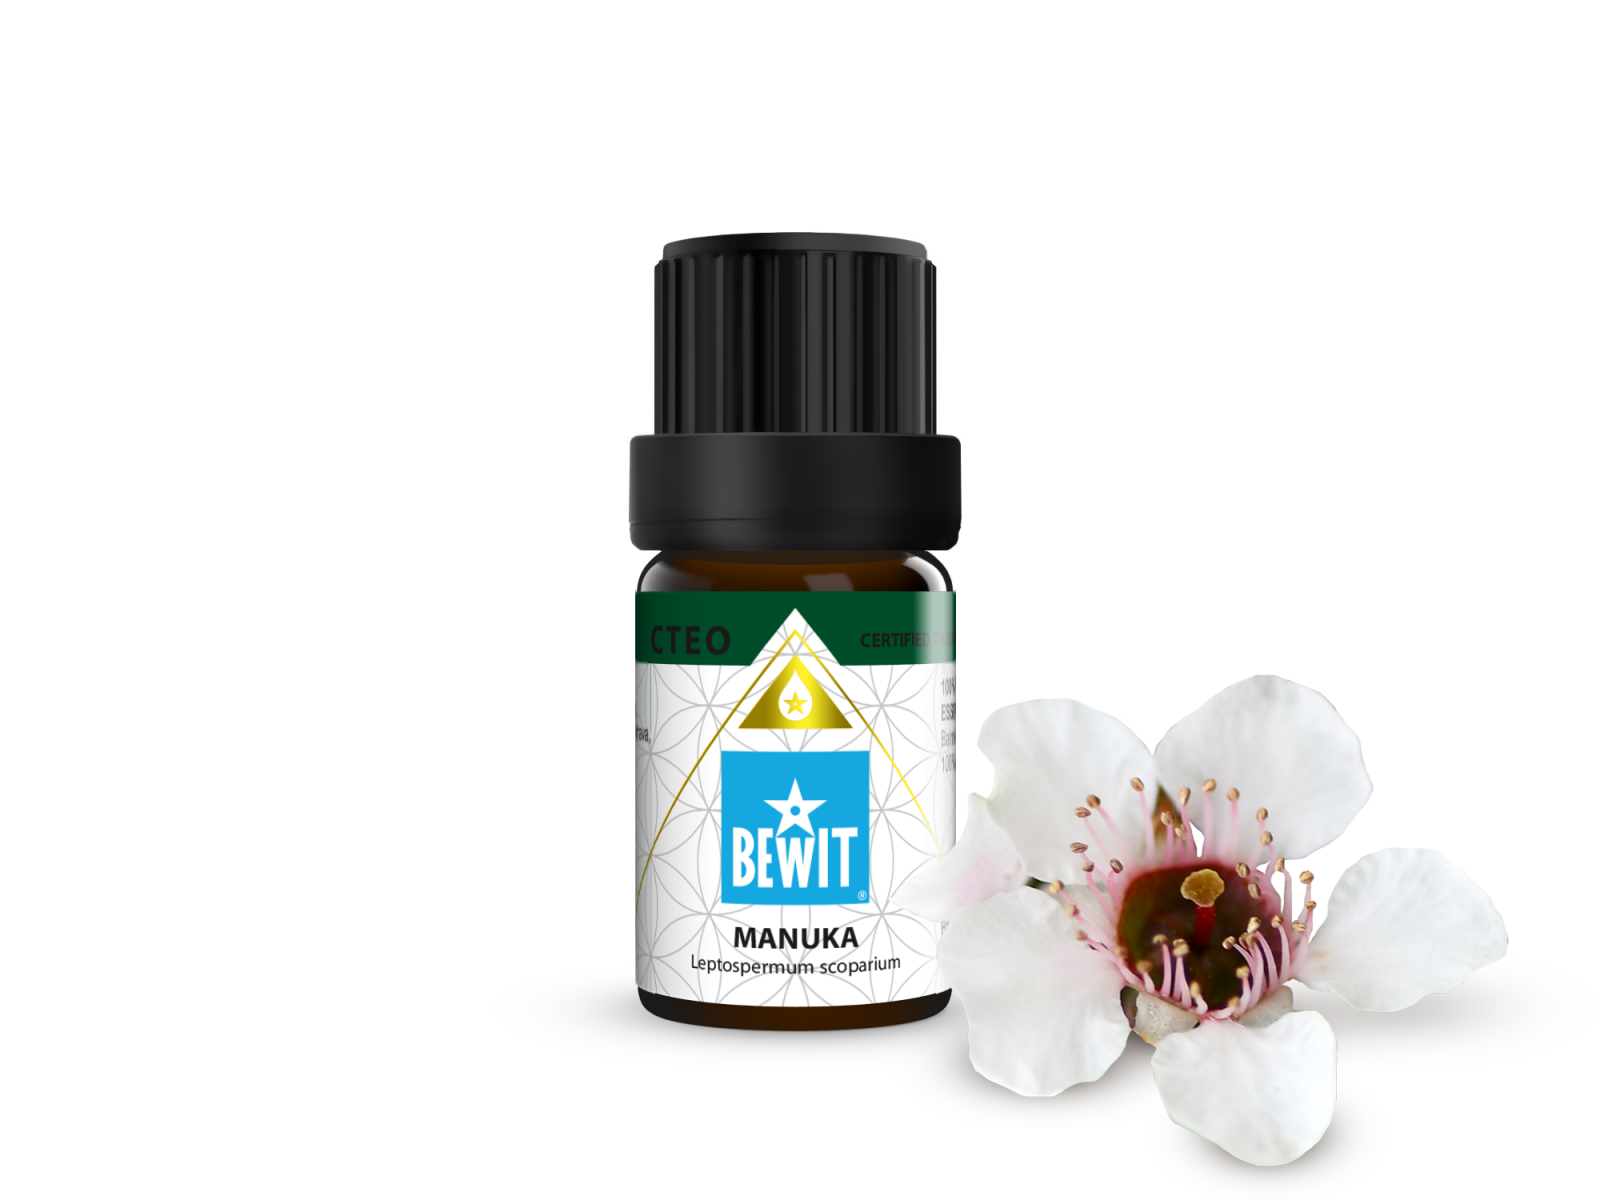 BEWIT Manuka - 100% pure and natural CTEO® essential oil - 1